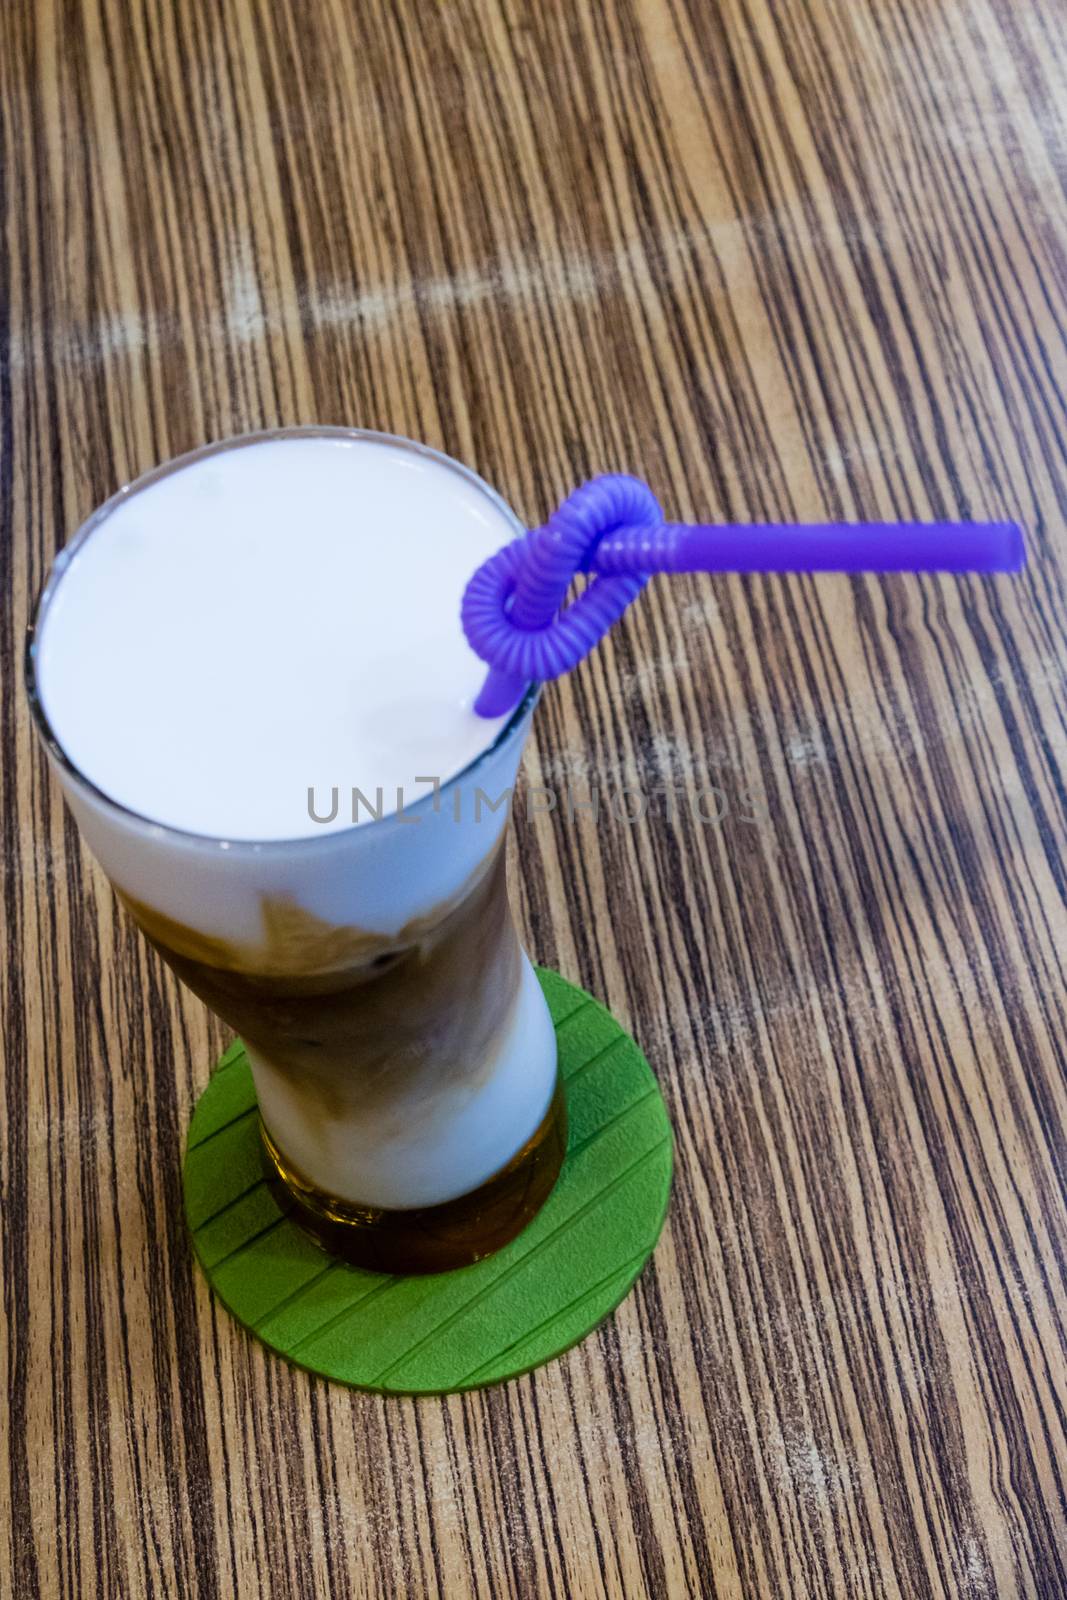 Cold capuccino in tall glass with straw